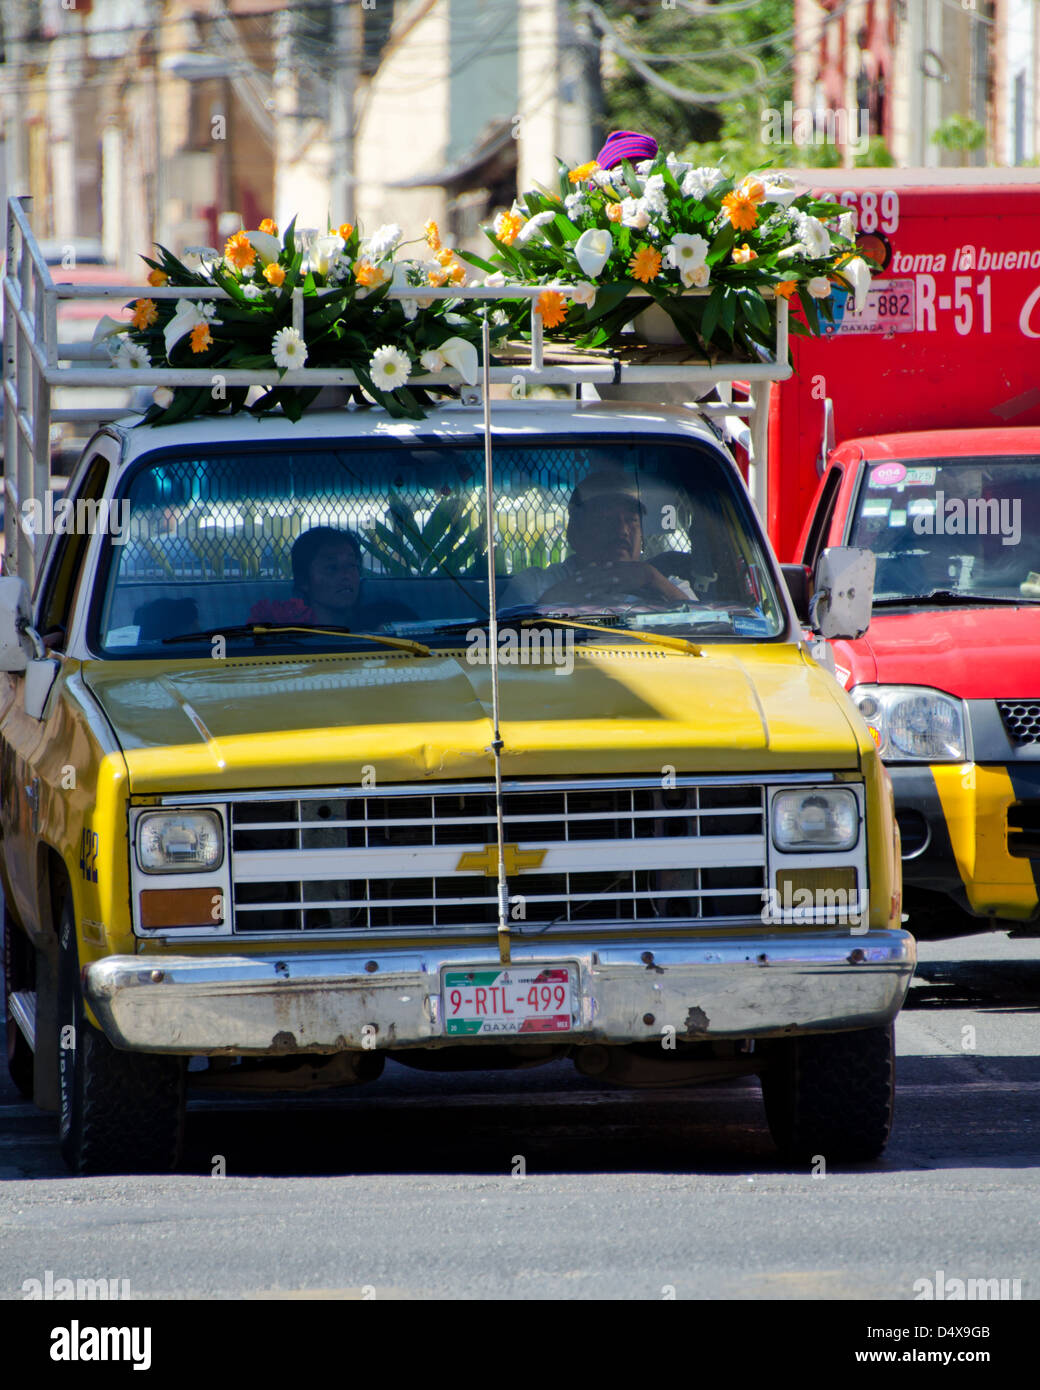 A delivery truck carries flower arrangements on the roof and a family in the cab, Oaxaca, Mexico. Stock Photo